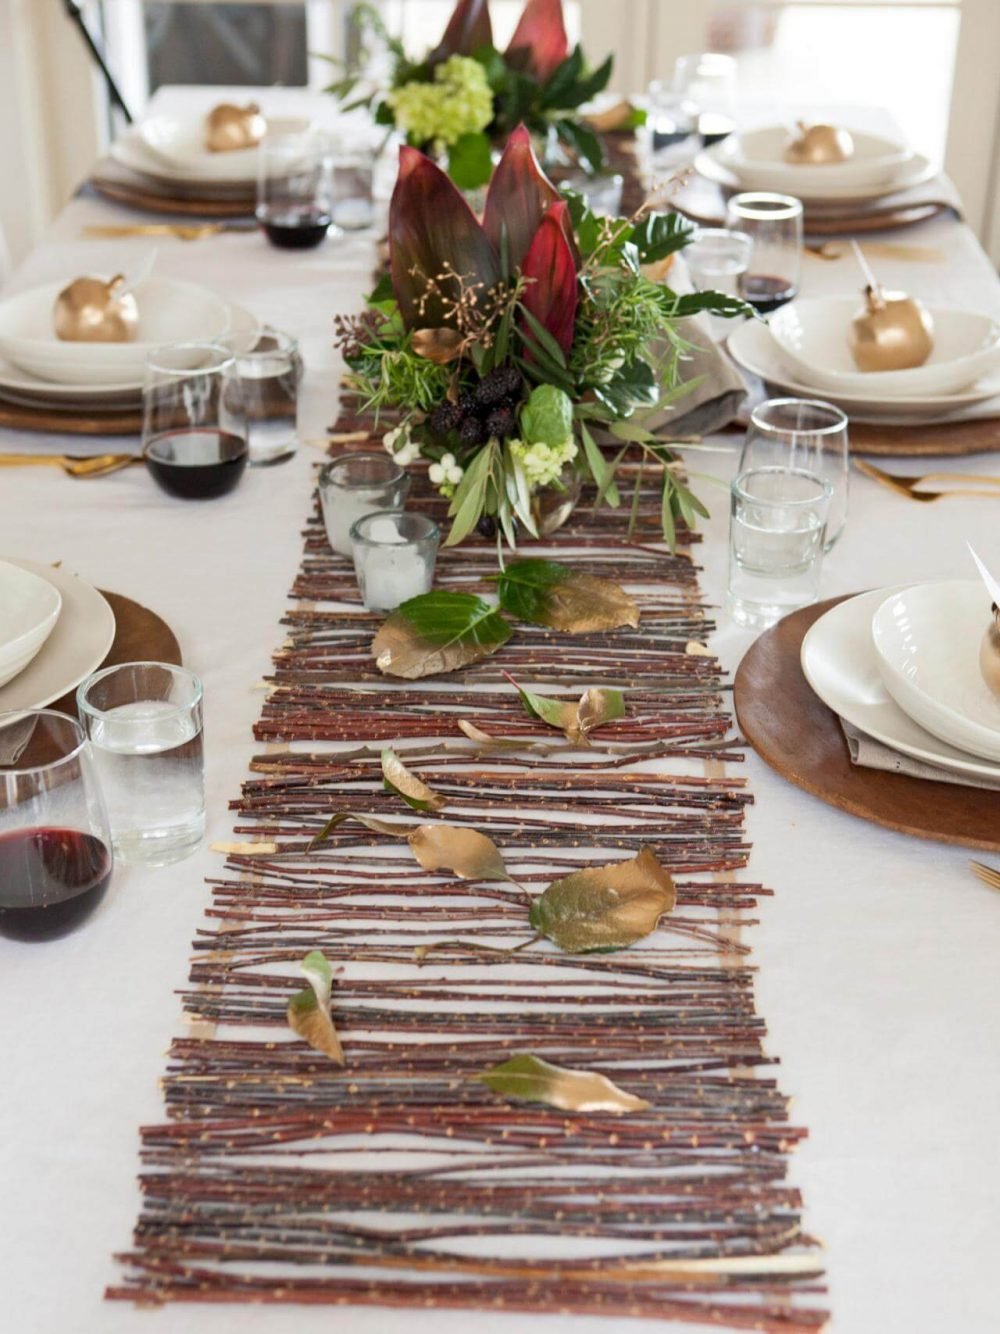 Table Runners for thanksgiving dinner decoration ideas